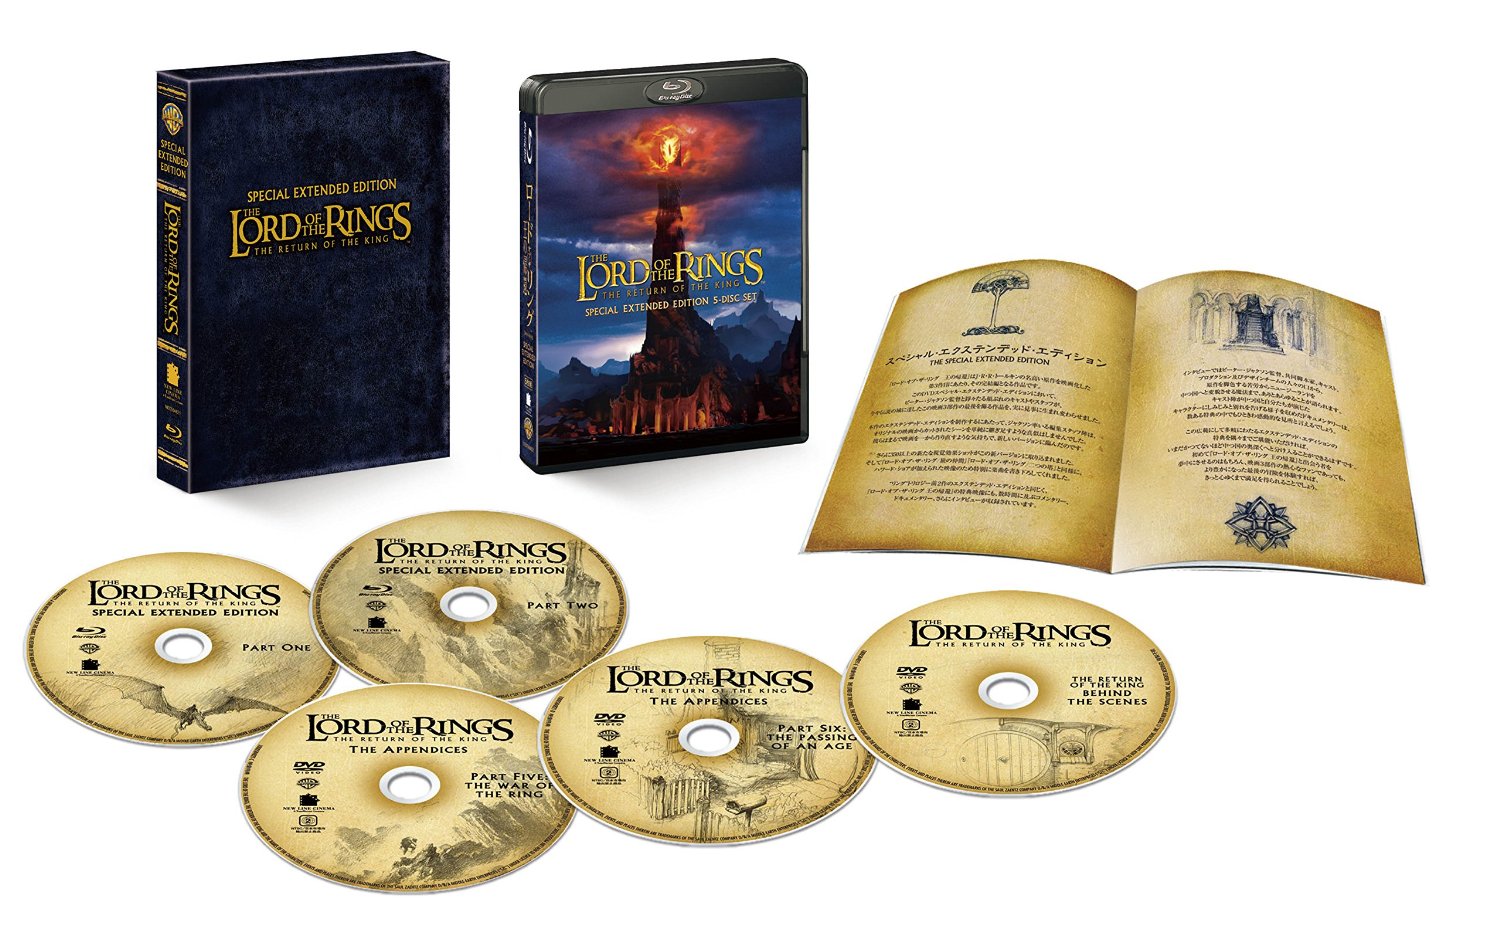 Slipbox - The Lord of the Rings: The Return of the King (Blu-ray 